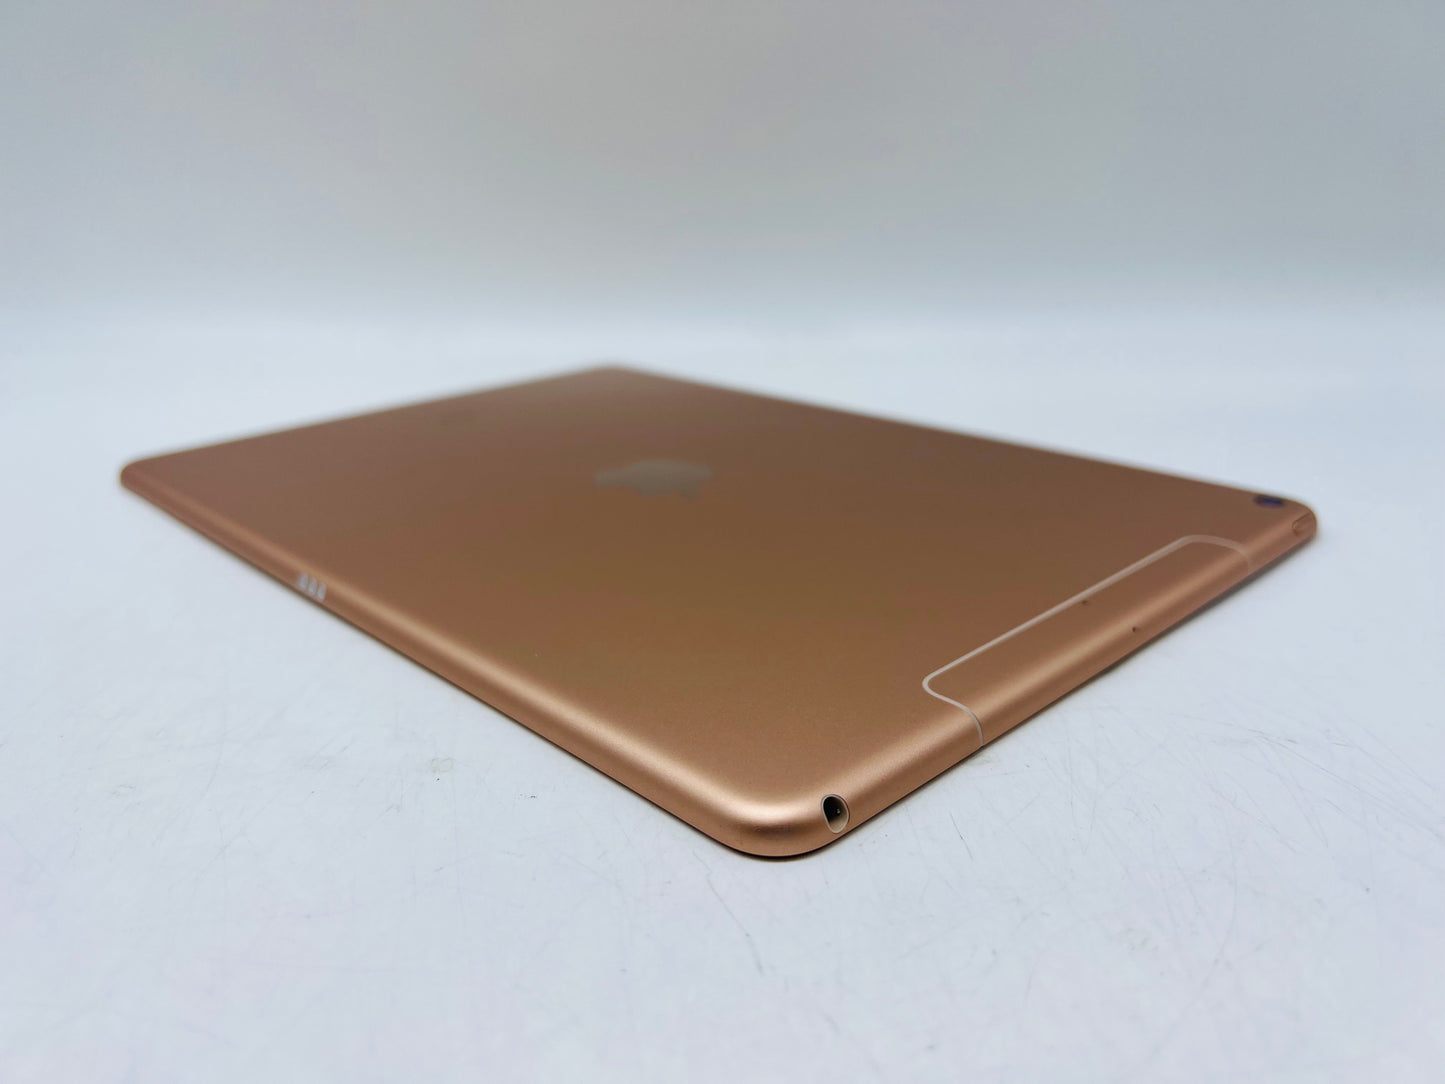 Apple 2019 iPad Air 3rd generation 10.5 in 256GB Wi-Fi + Cell "Gold" Very good